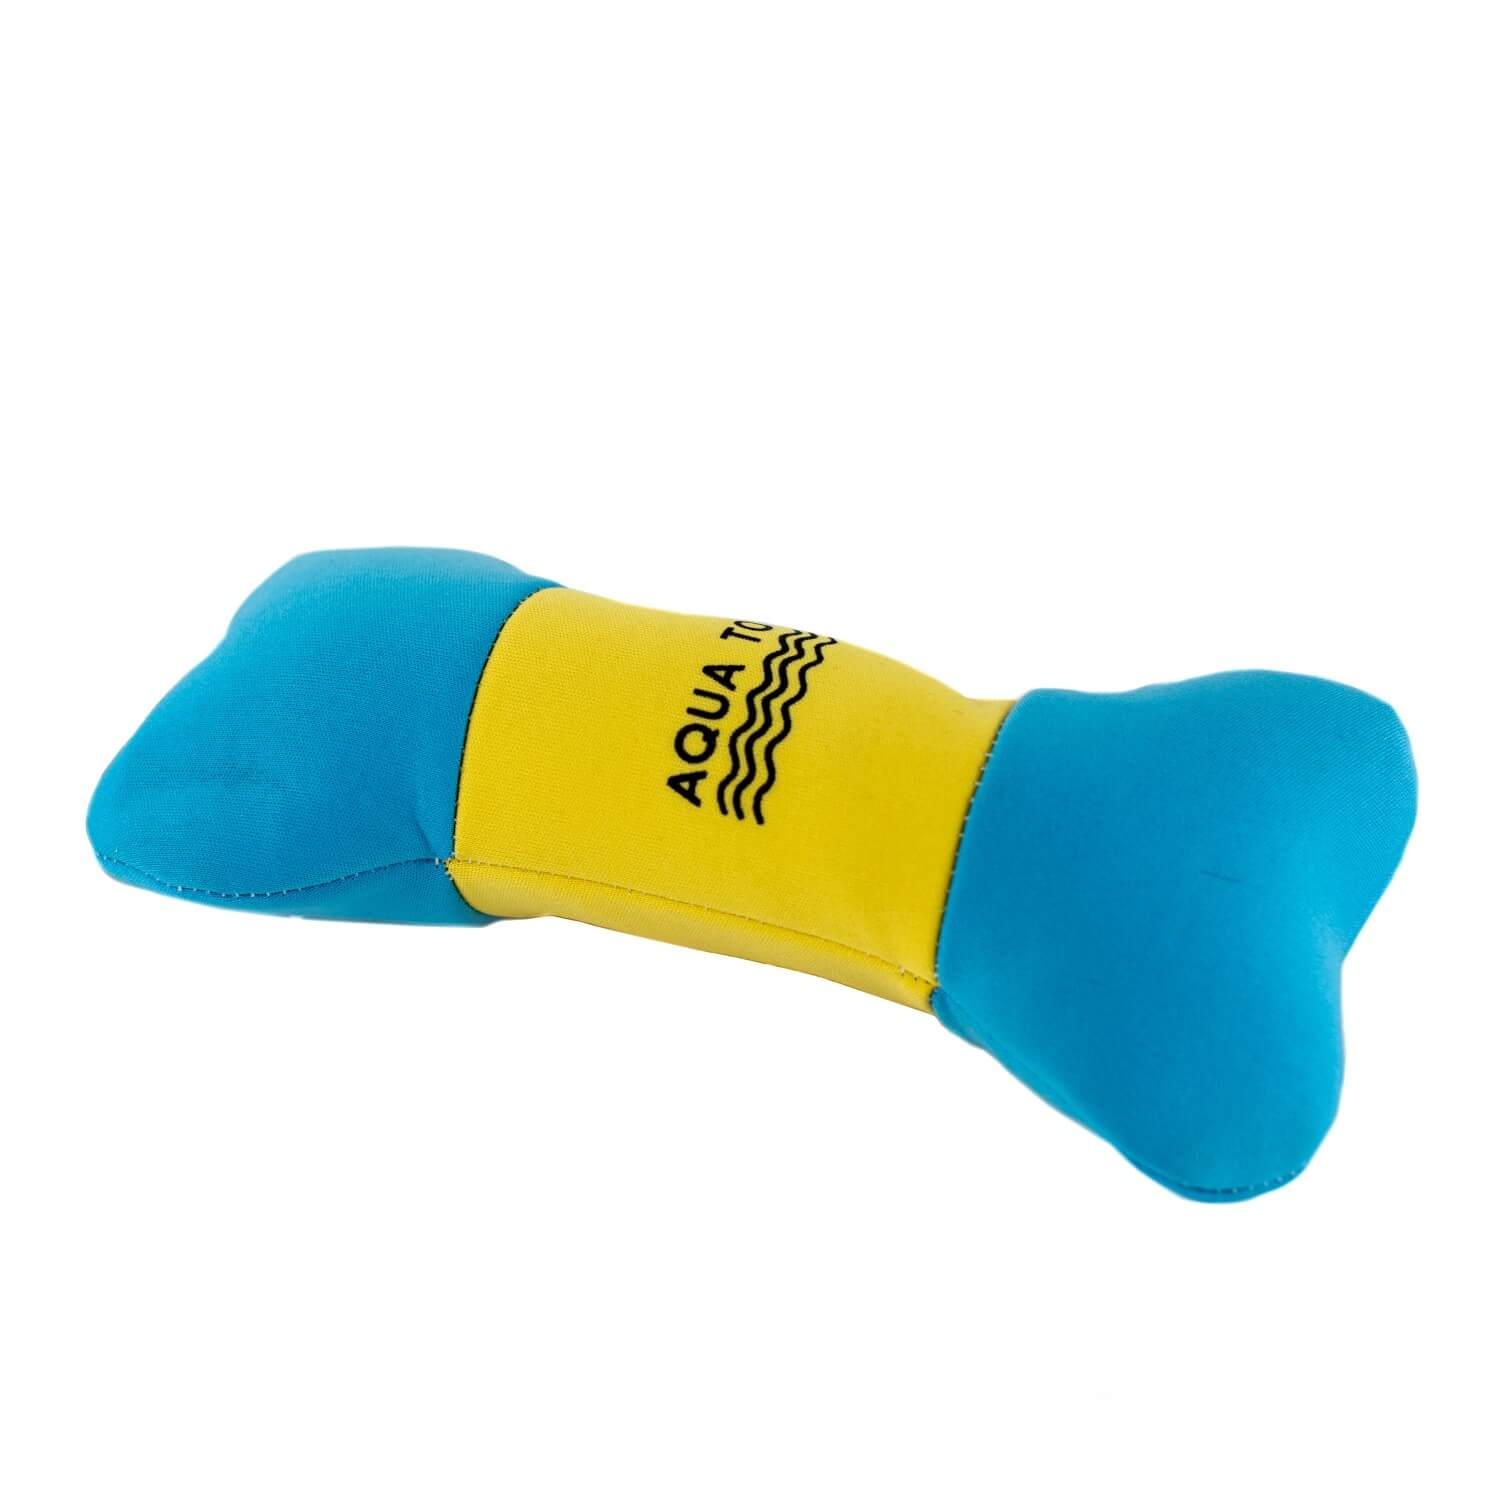 A blue and yellow Floating Water Bone With Squeaker shaped pillow.